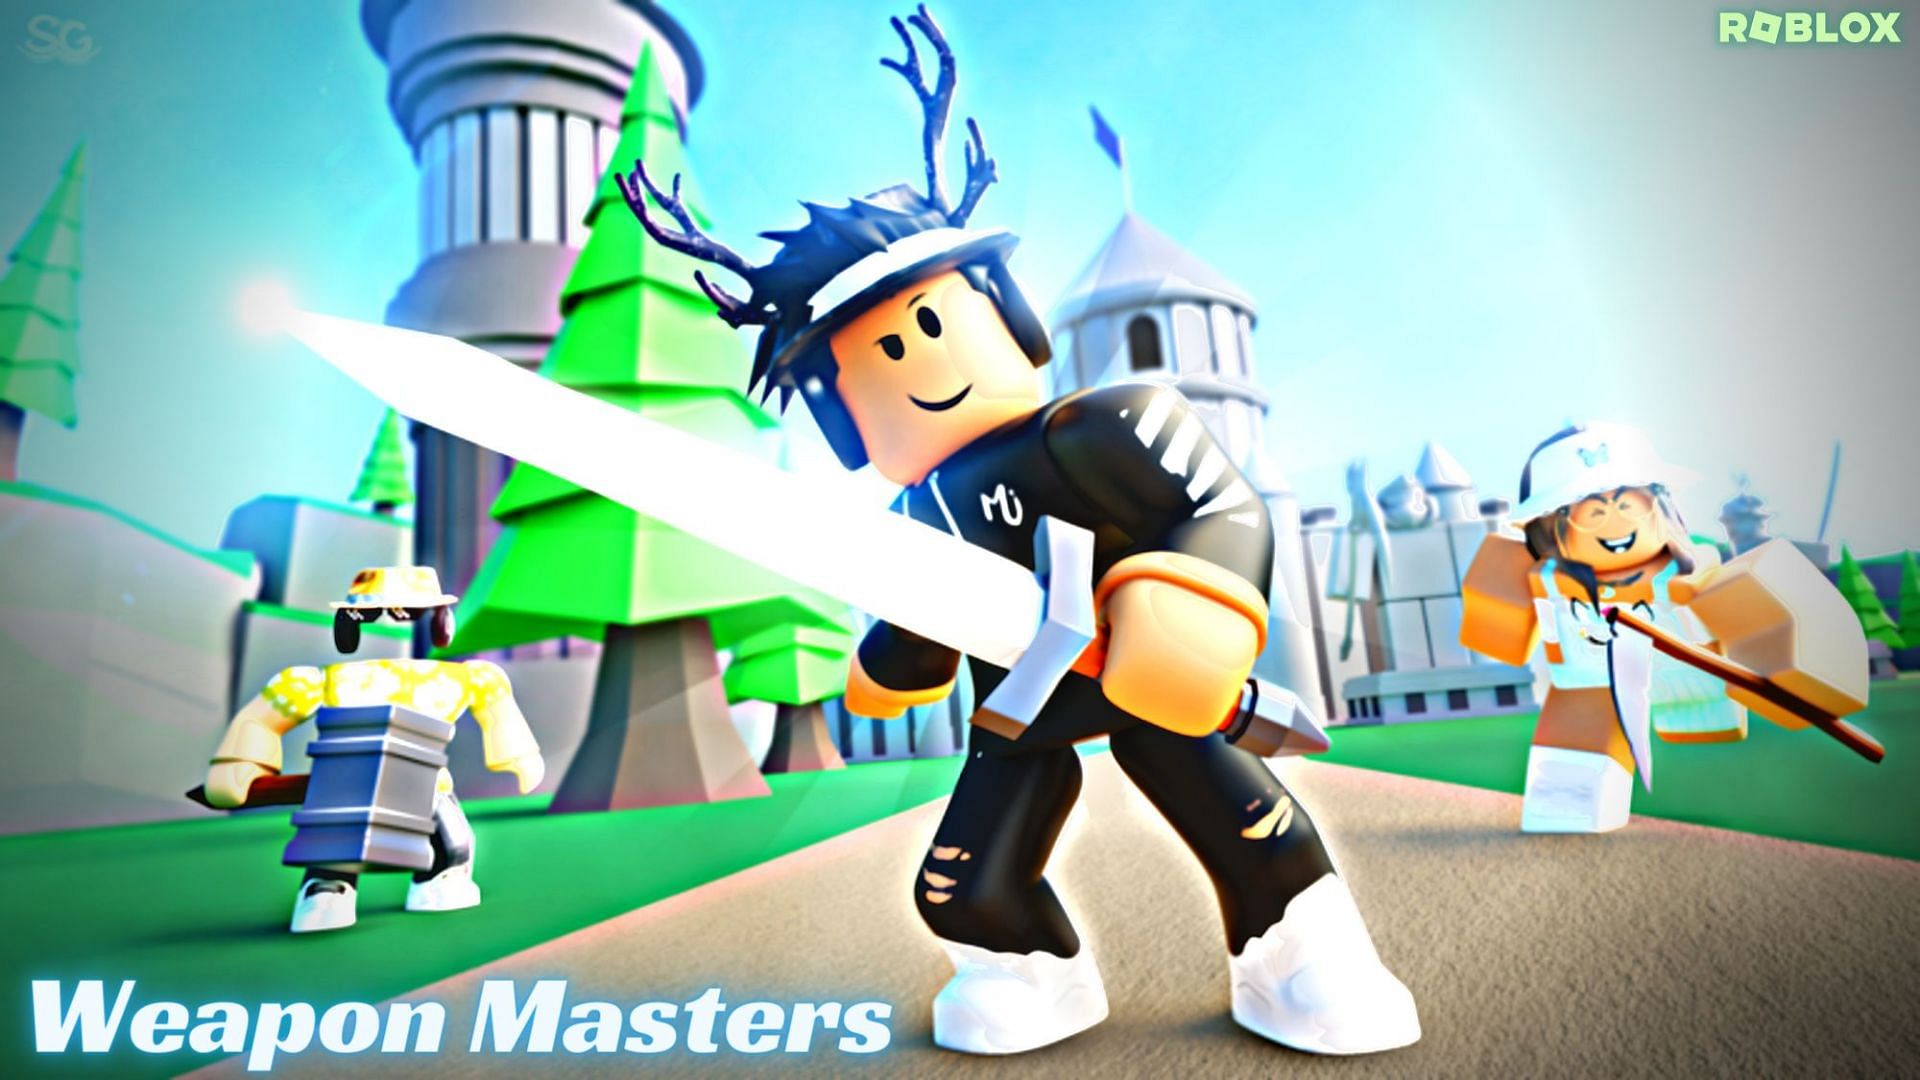 Fight with funky weapons (Image via Roblox)